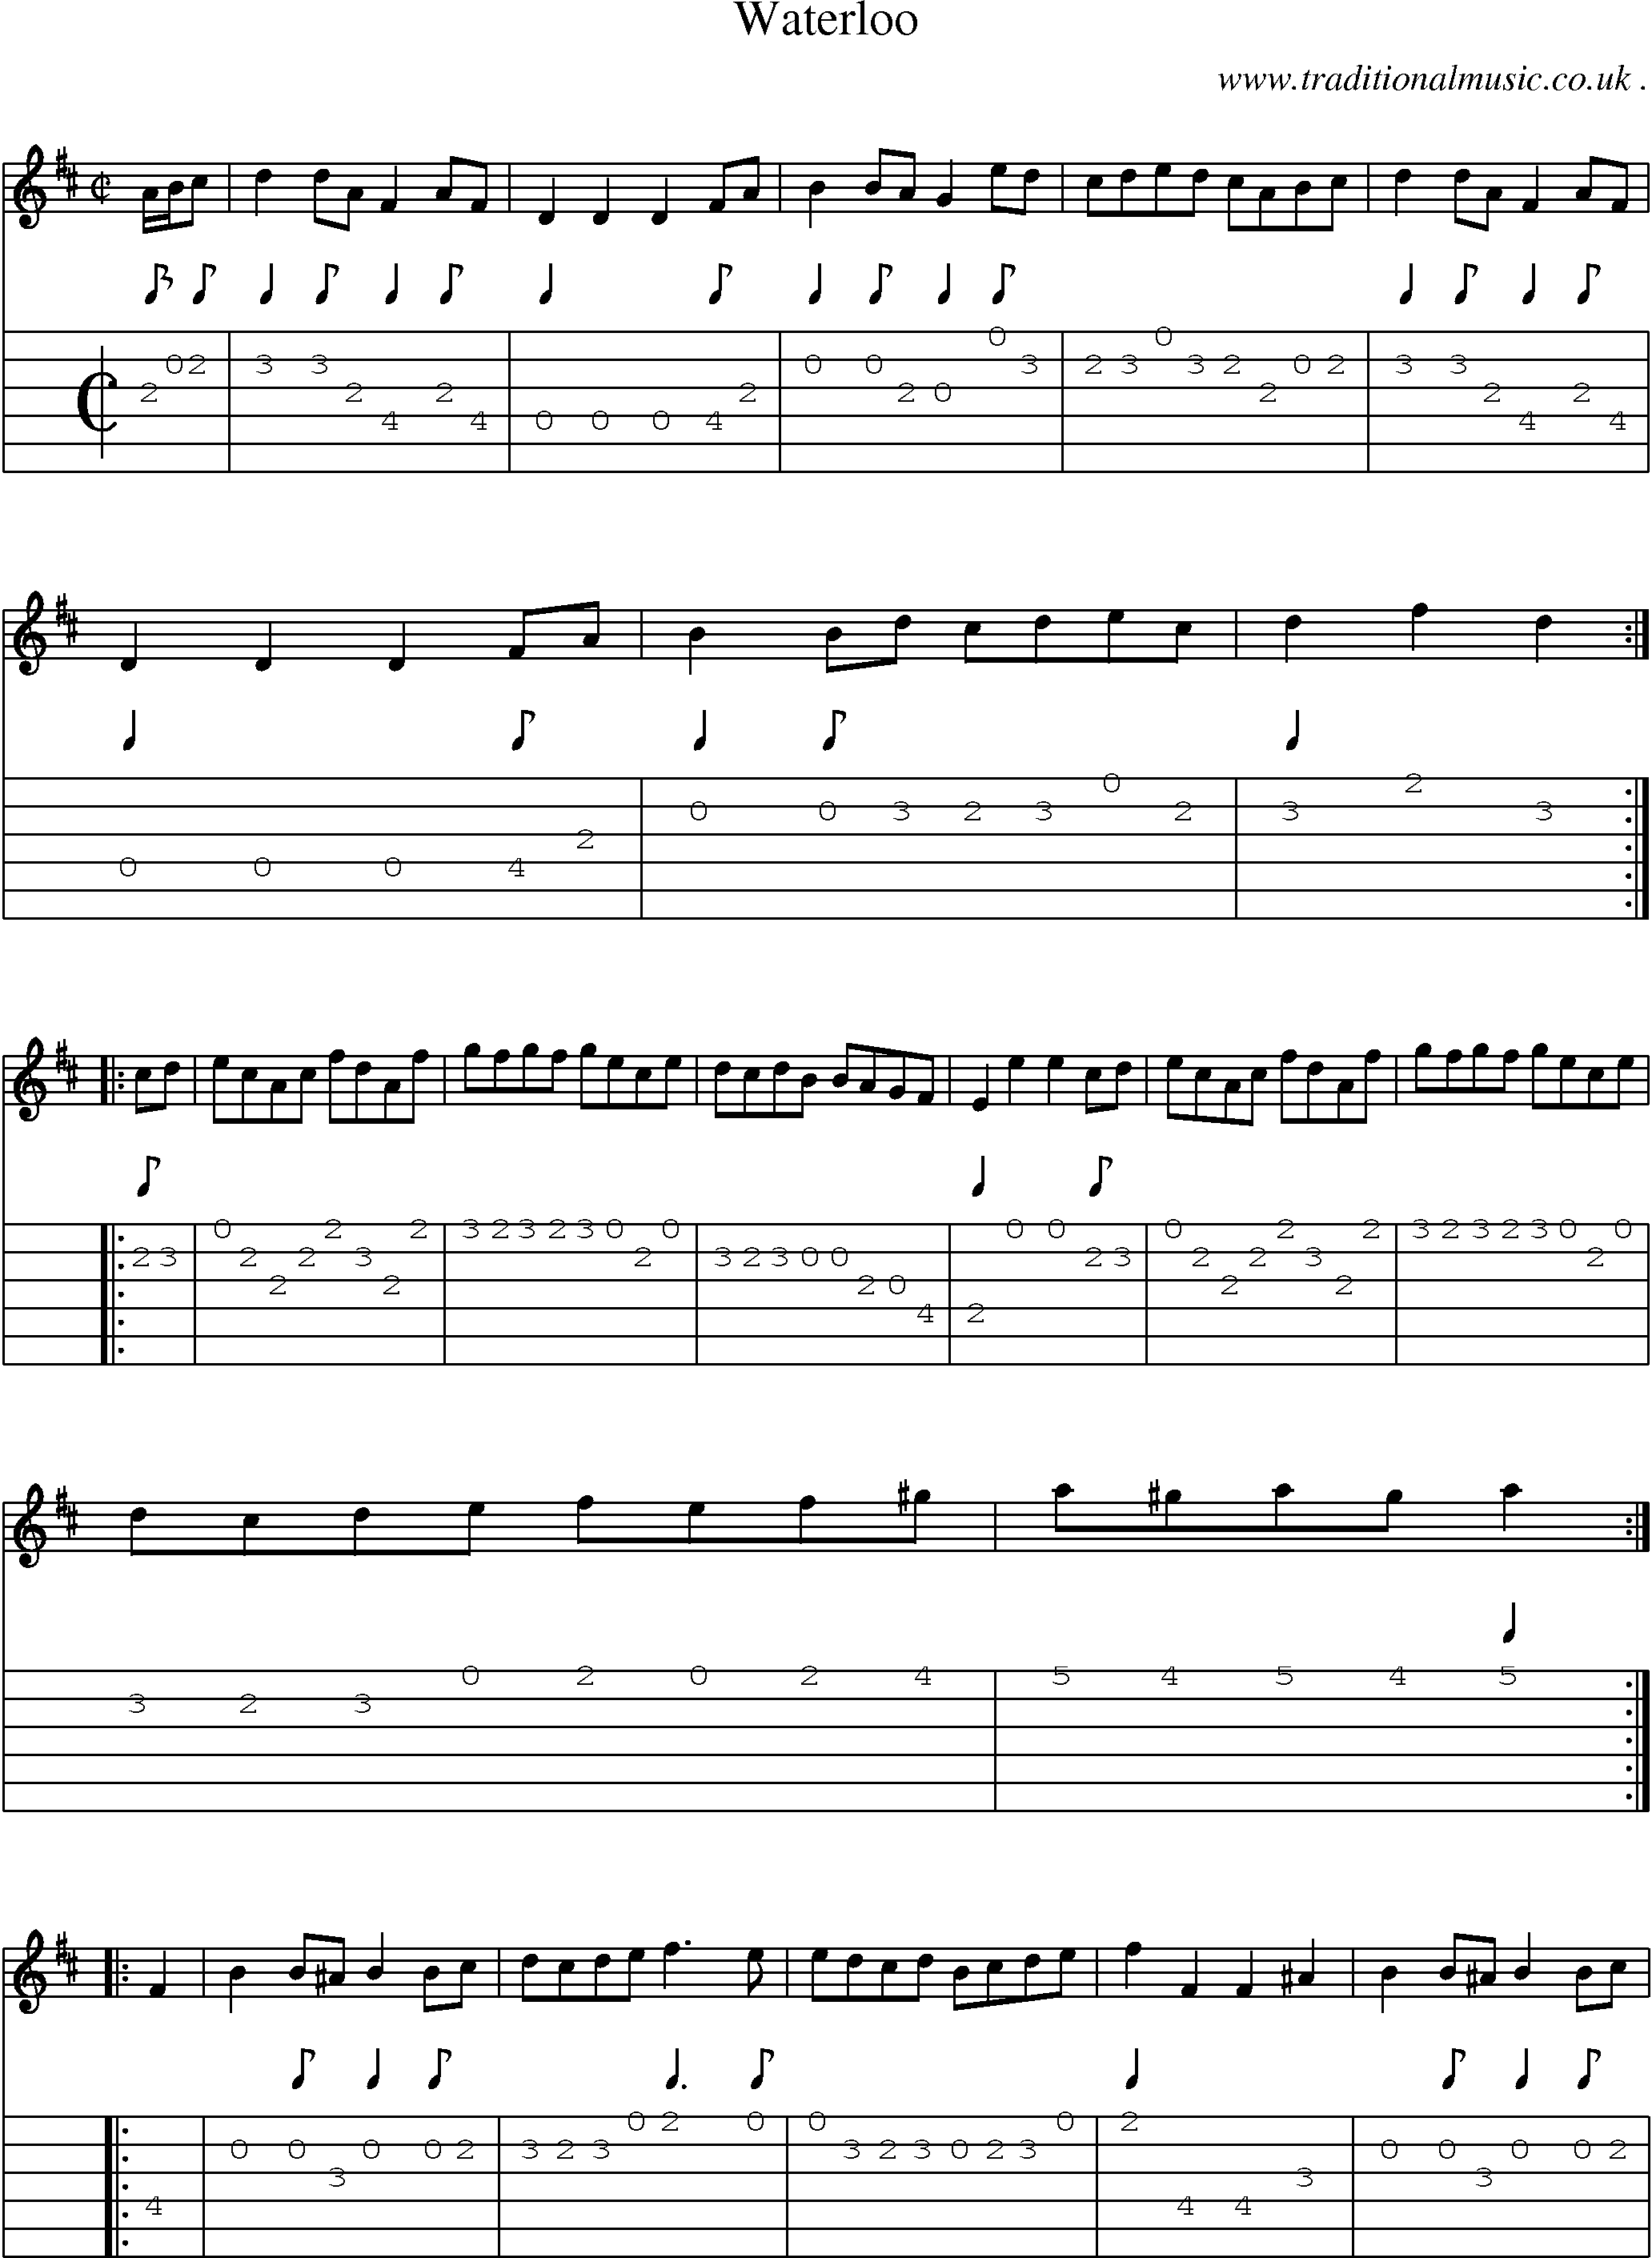 Sheet-music  score, Chords and Guitar Tabs for Waterloo